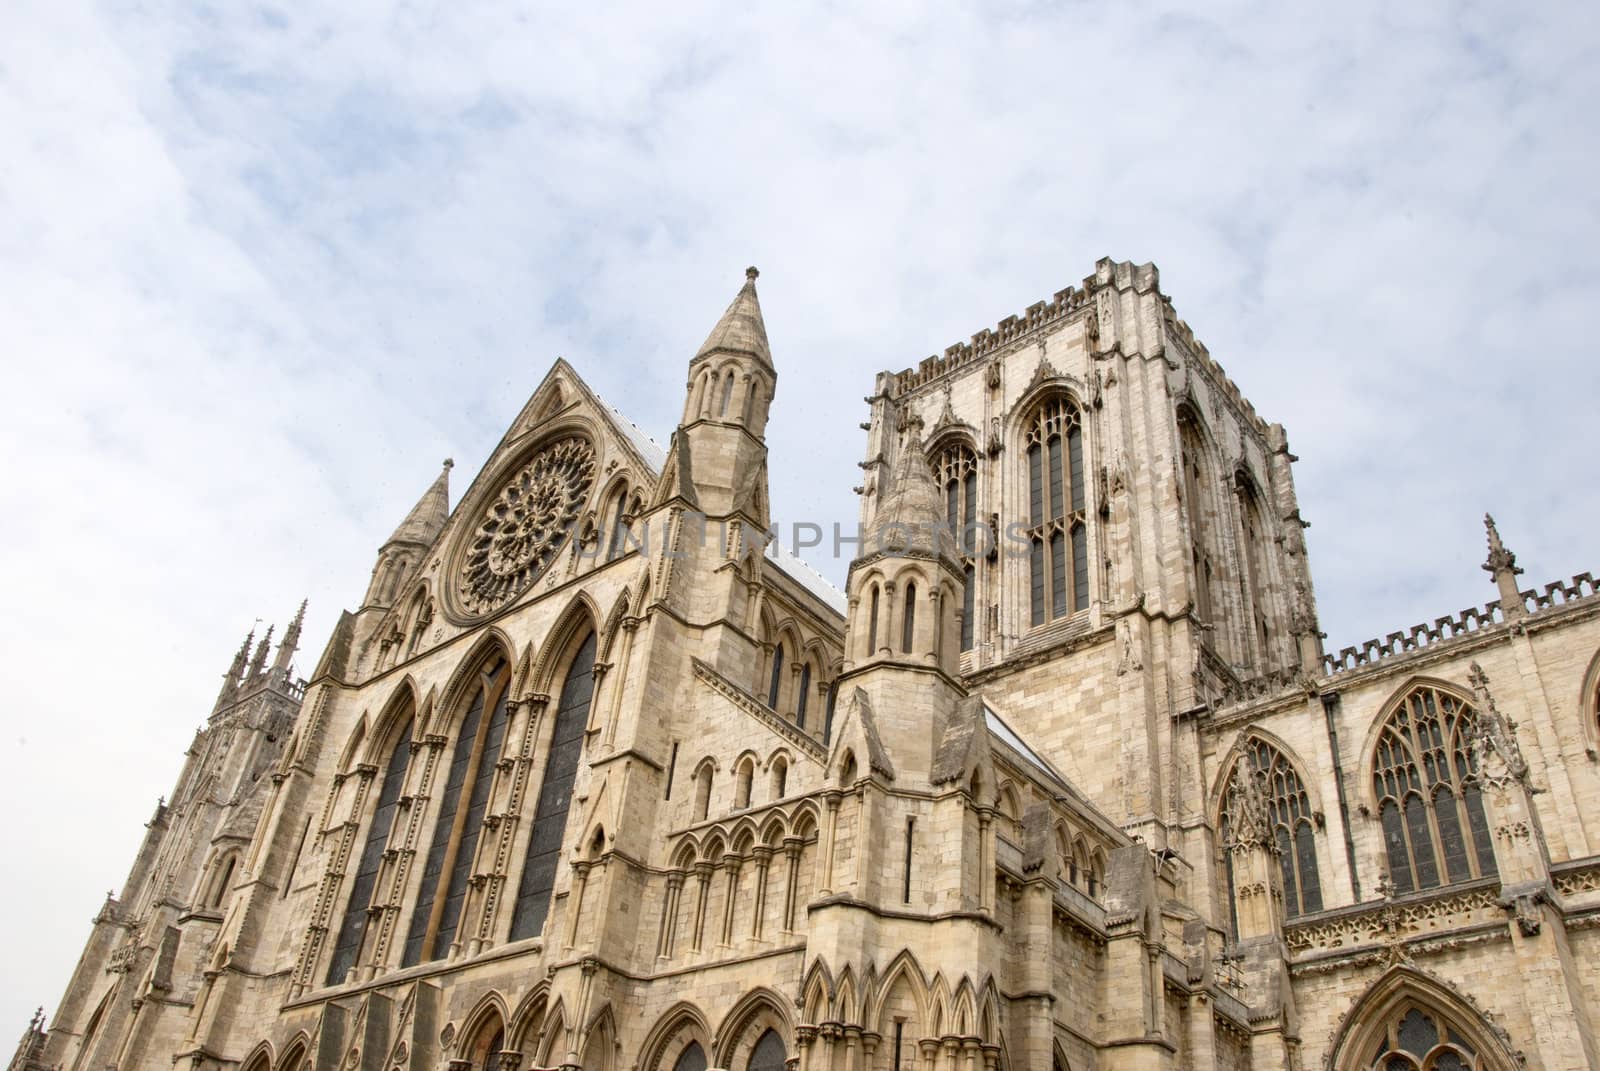 The South Side of York Minster showing Towers and Rose Window